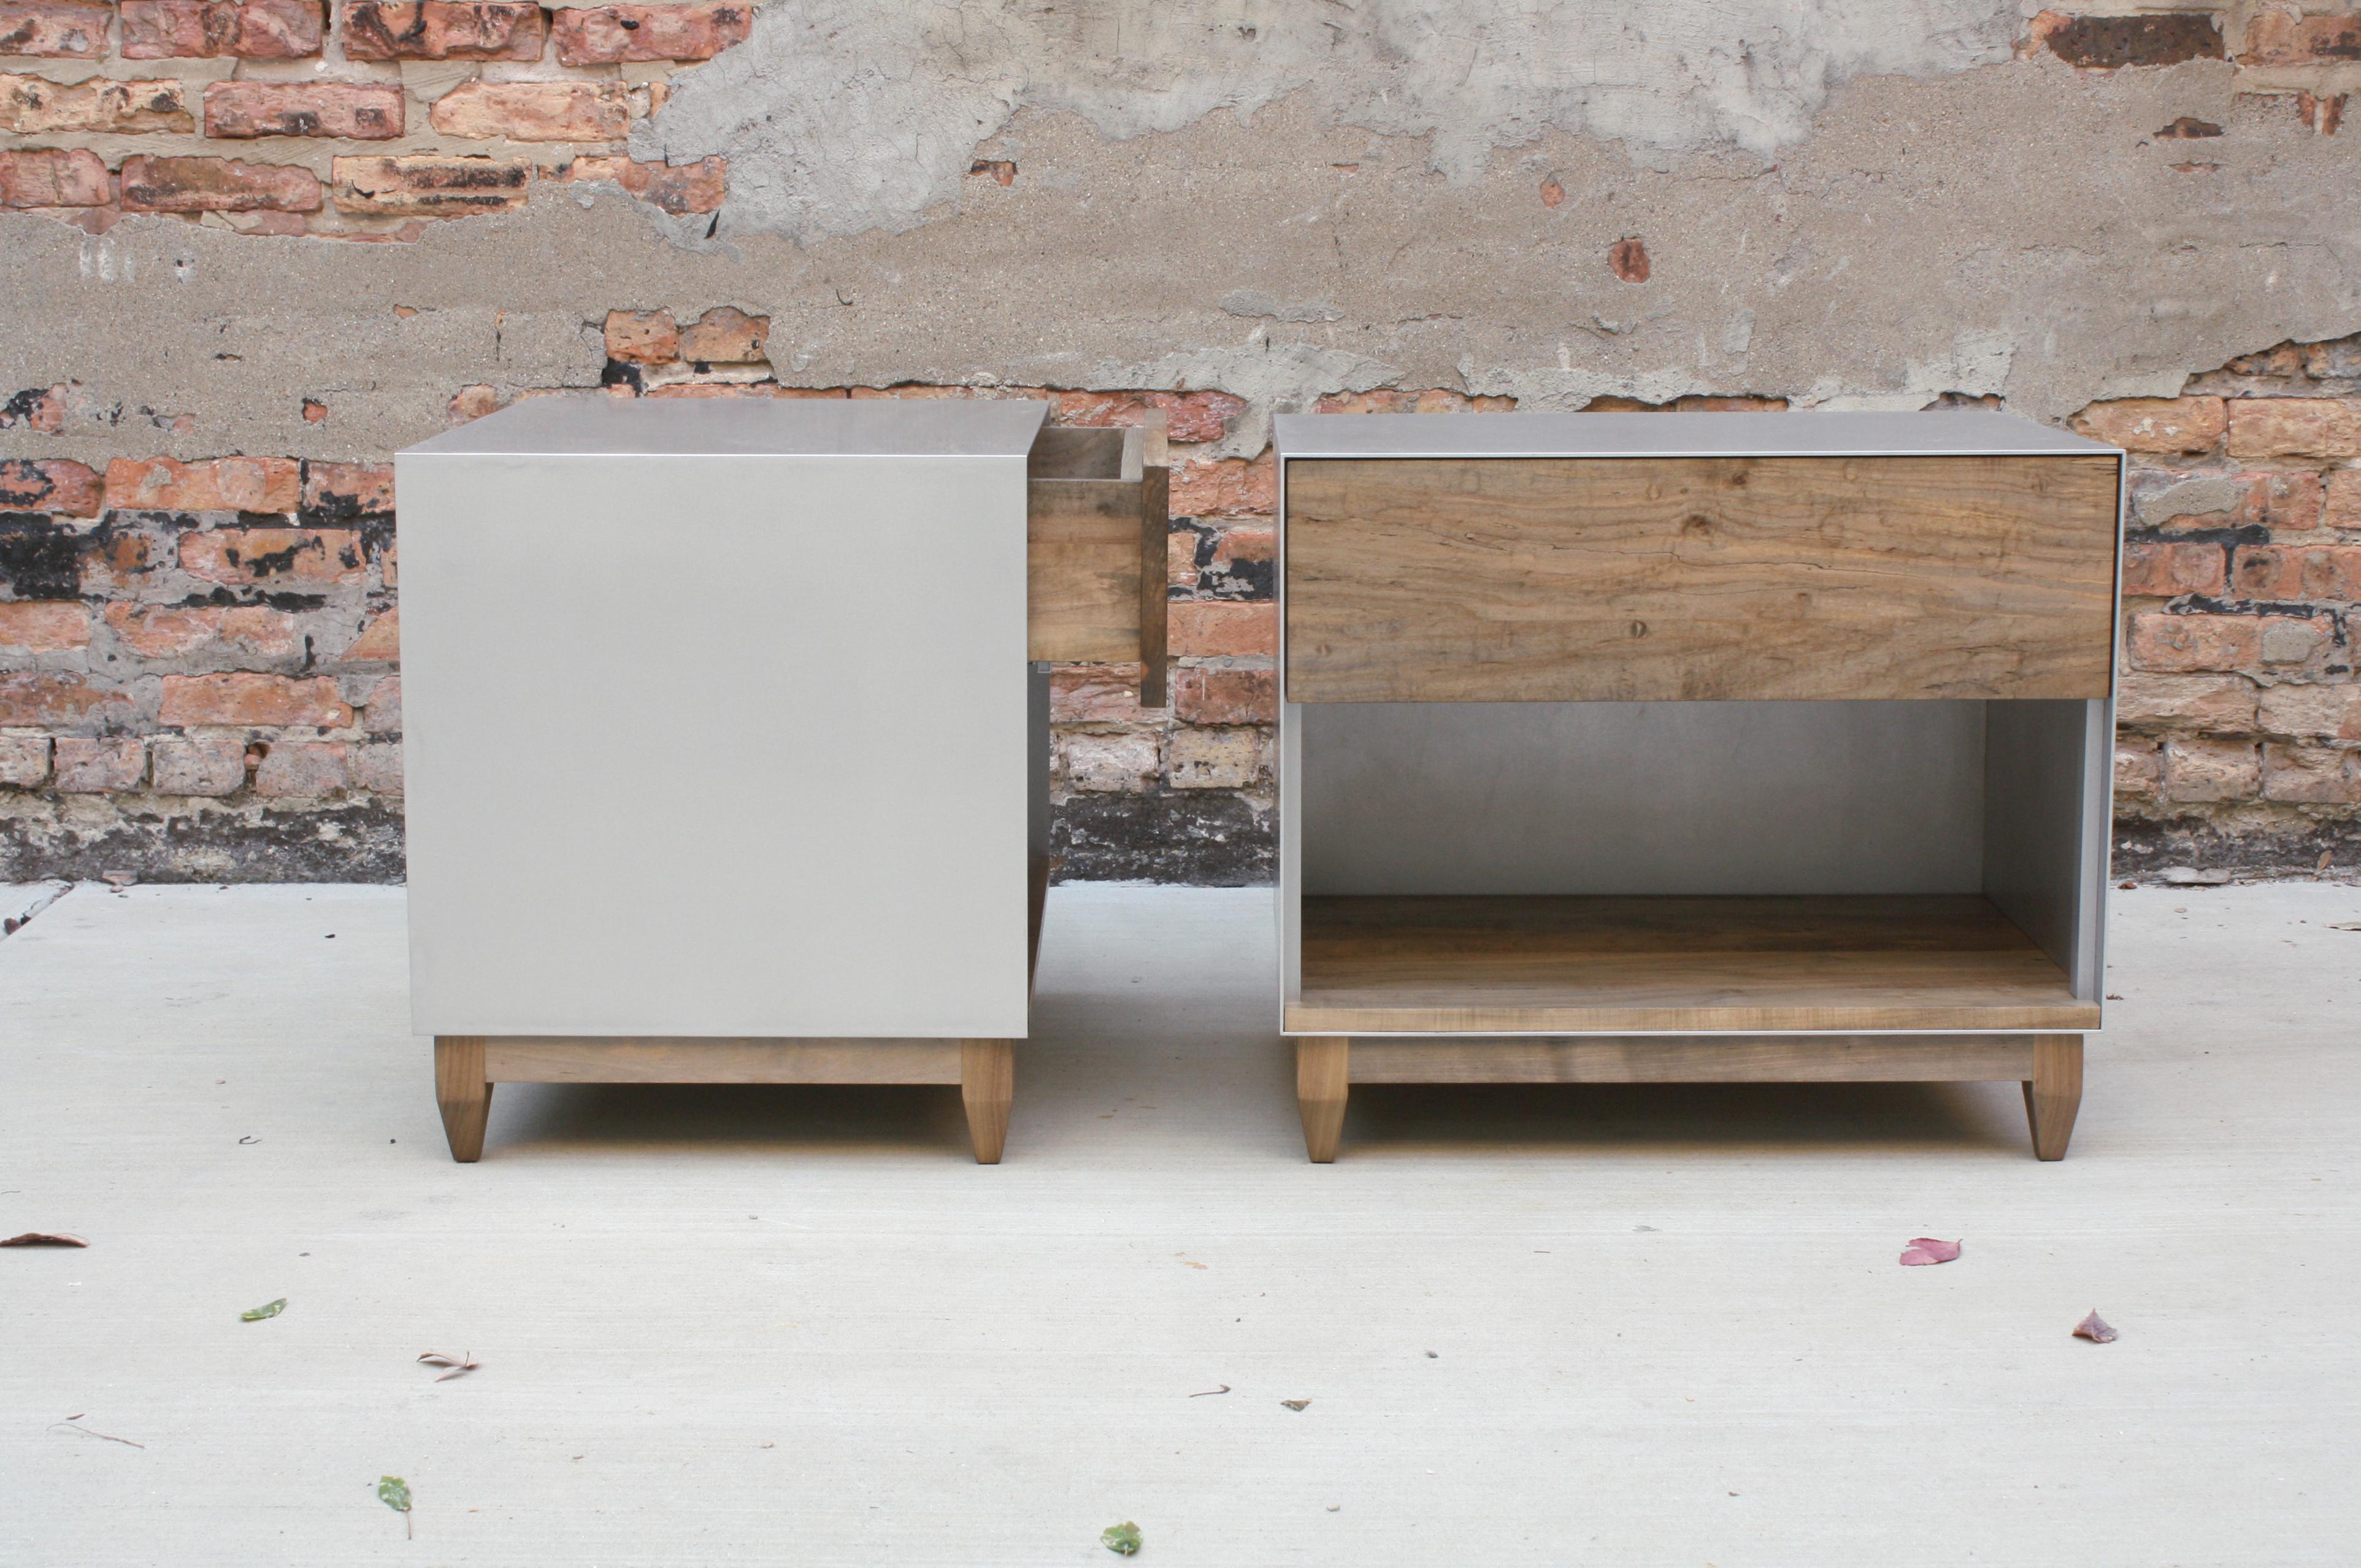 Oxide, Handmade Nightstand or Side Cabinet - Waxed Aluminum and Oxidized Maple (amerikanisch) im Angebot